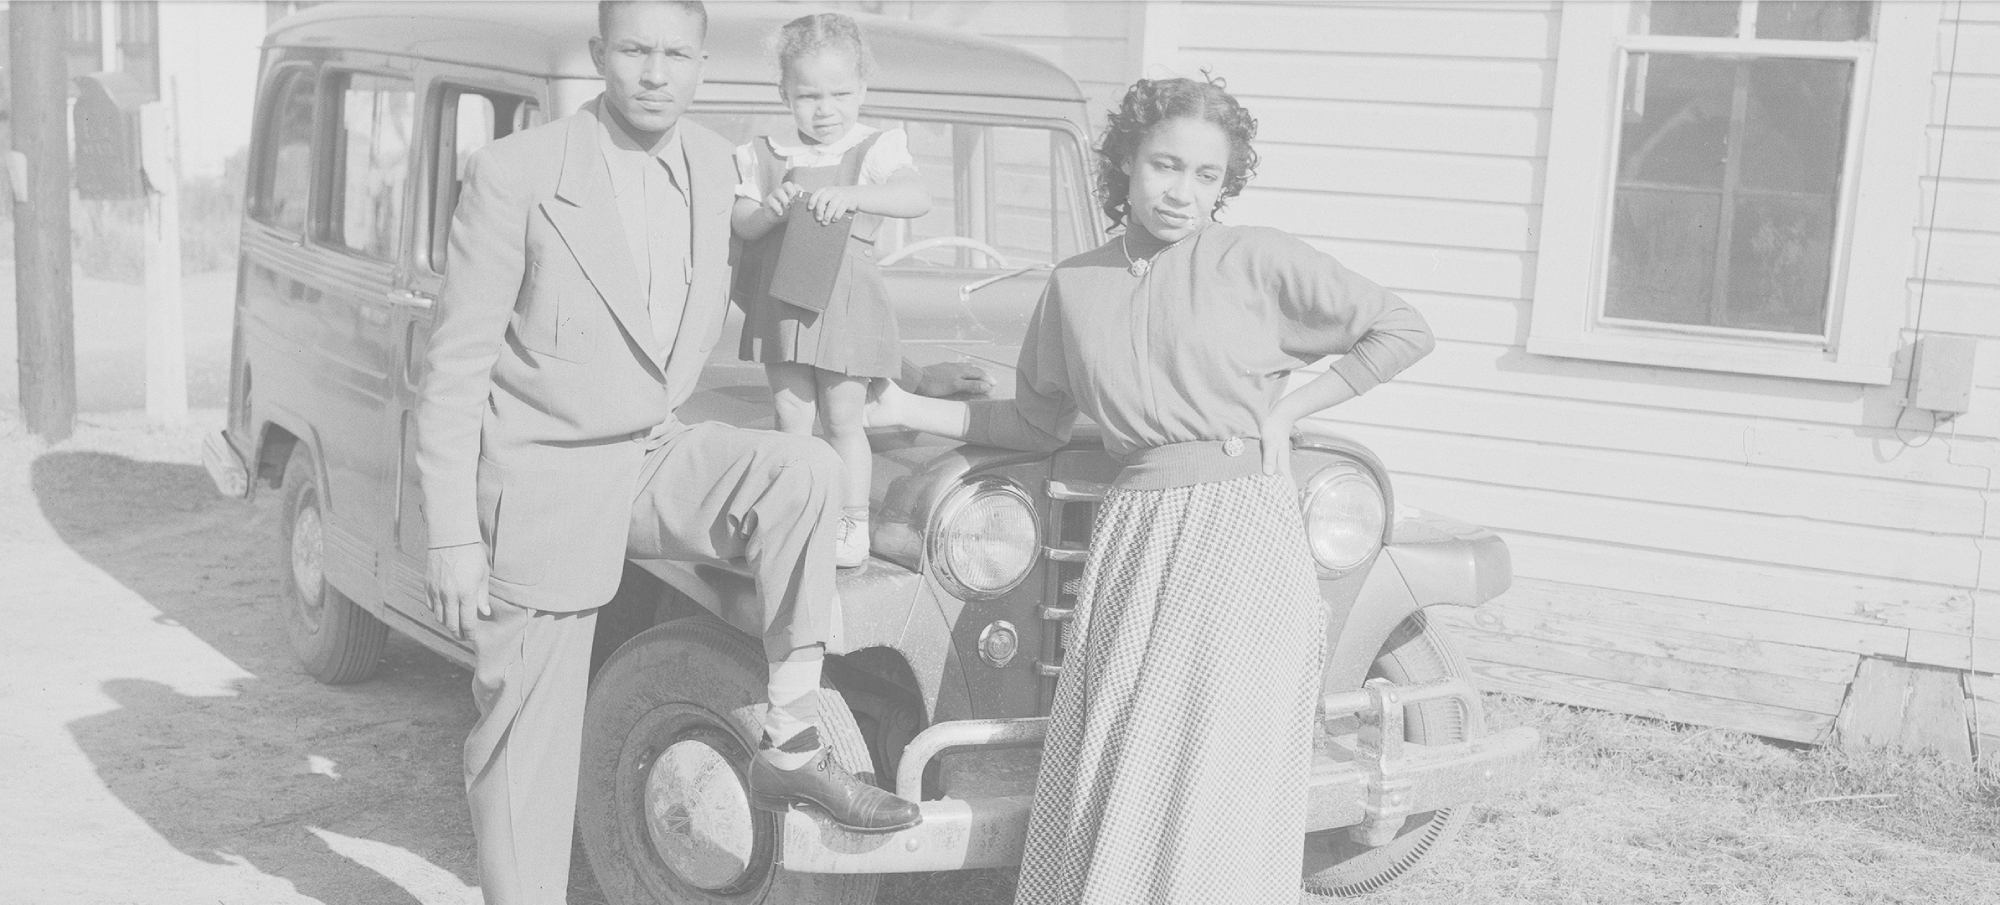 Family in front of a car